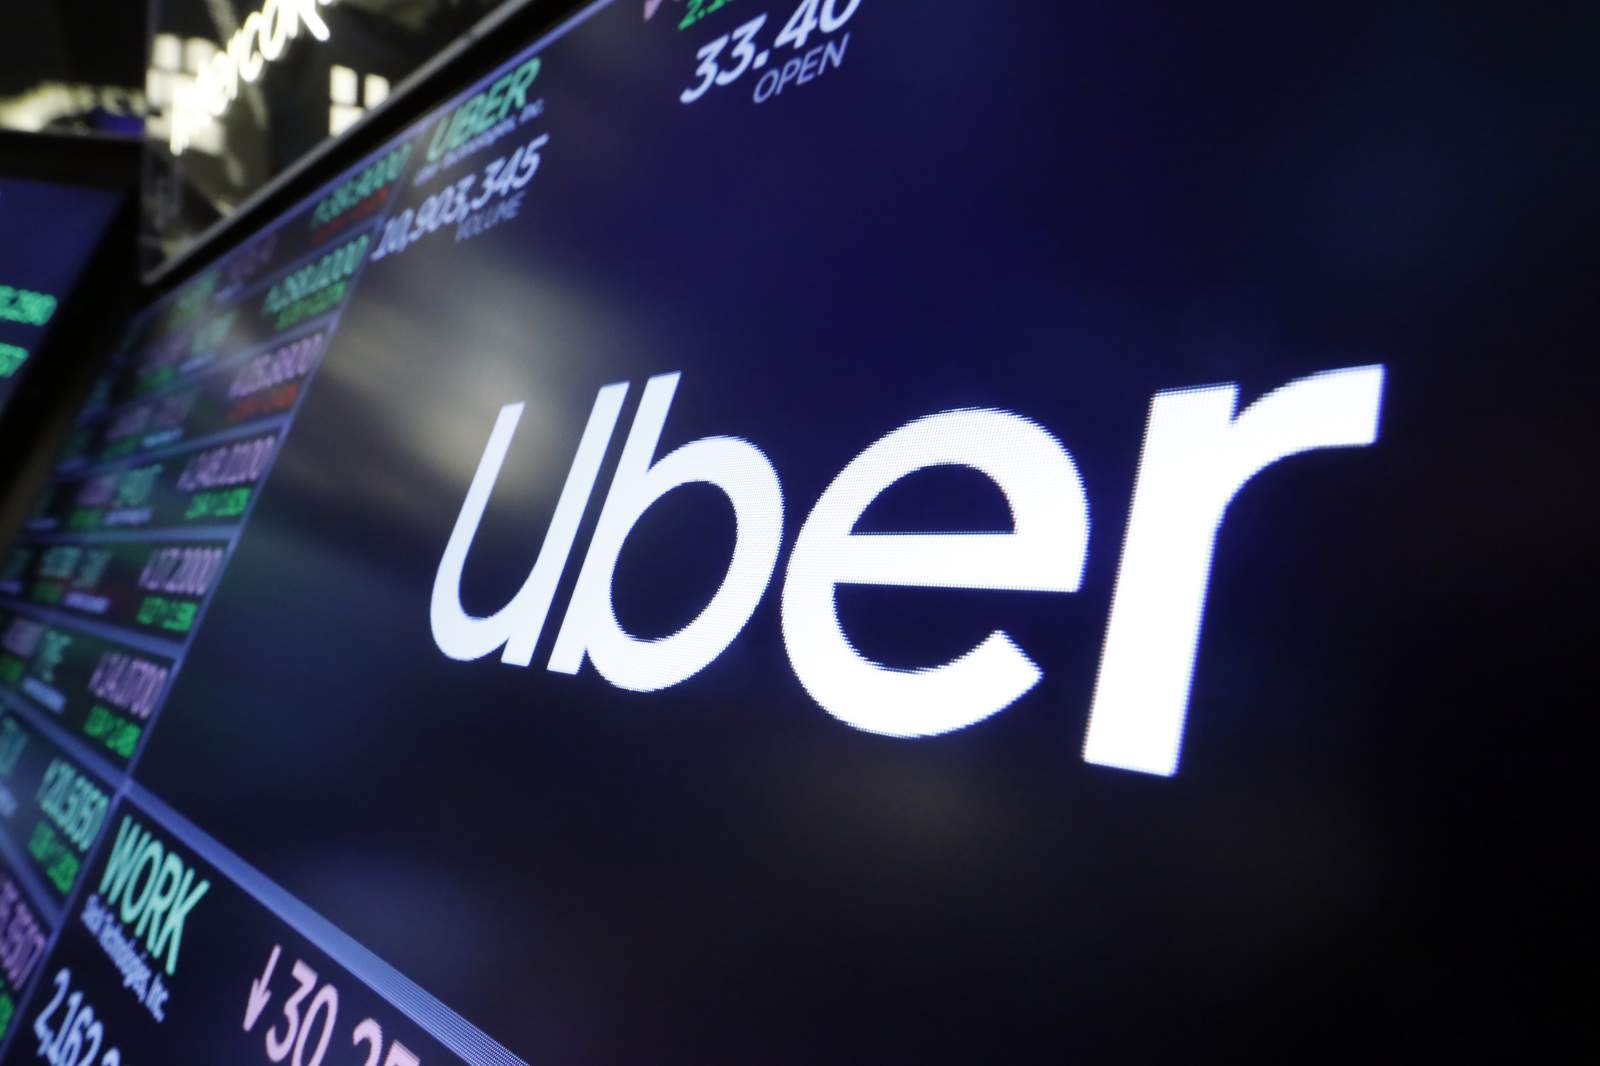 Uber cuts 3,000 jobs as pandemic slashes demand for rides